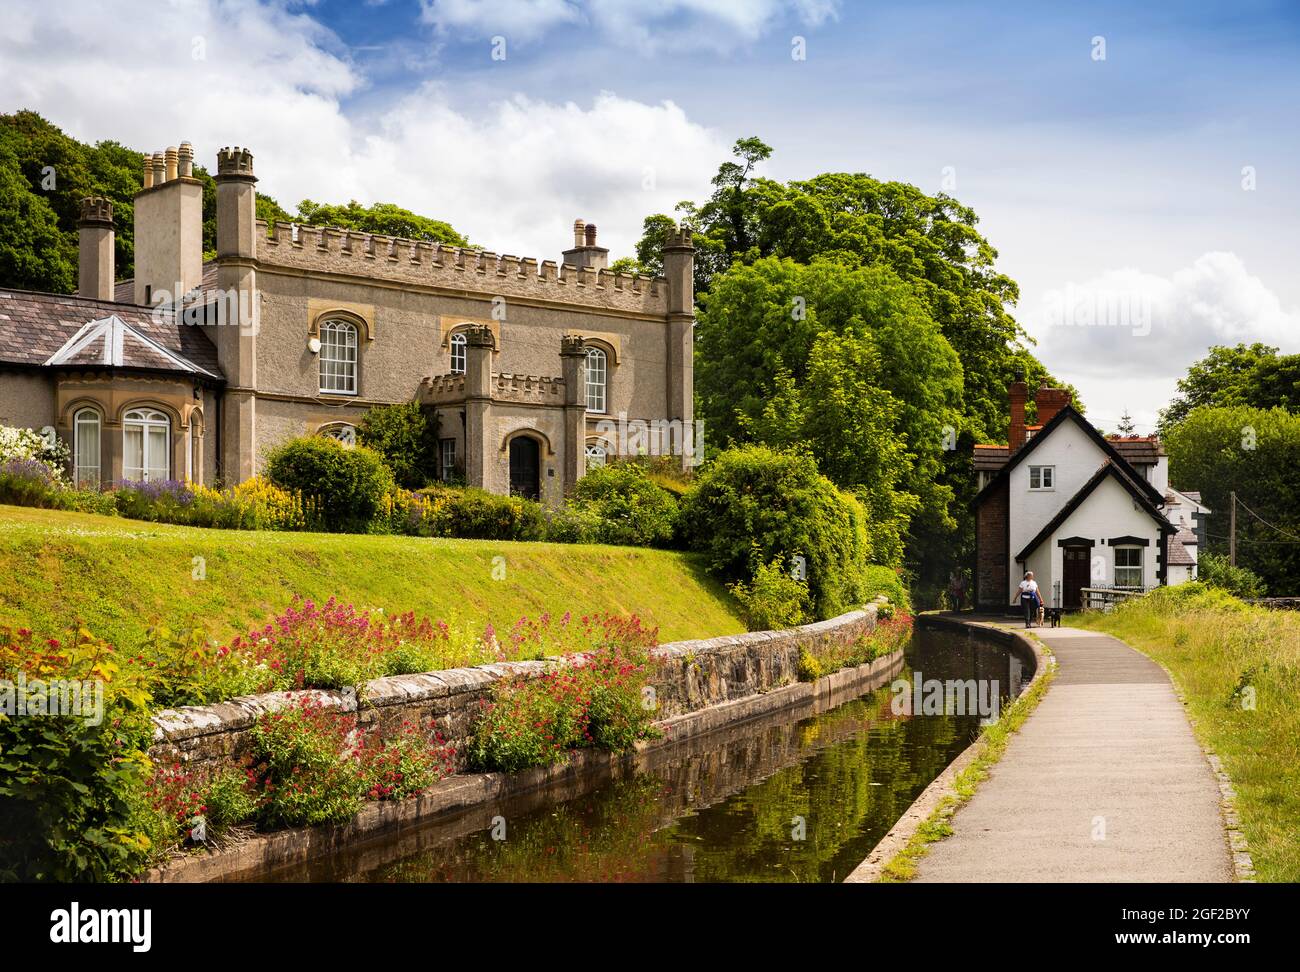 UK Wales, Clwyd, Llangollen, Siamber Wen, 1800s Gothic castellated house beside Llangollen Canal Stock Photo